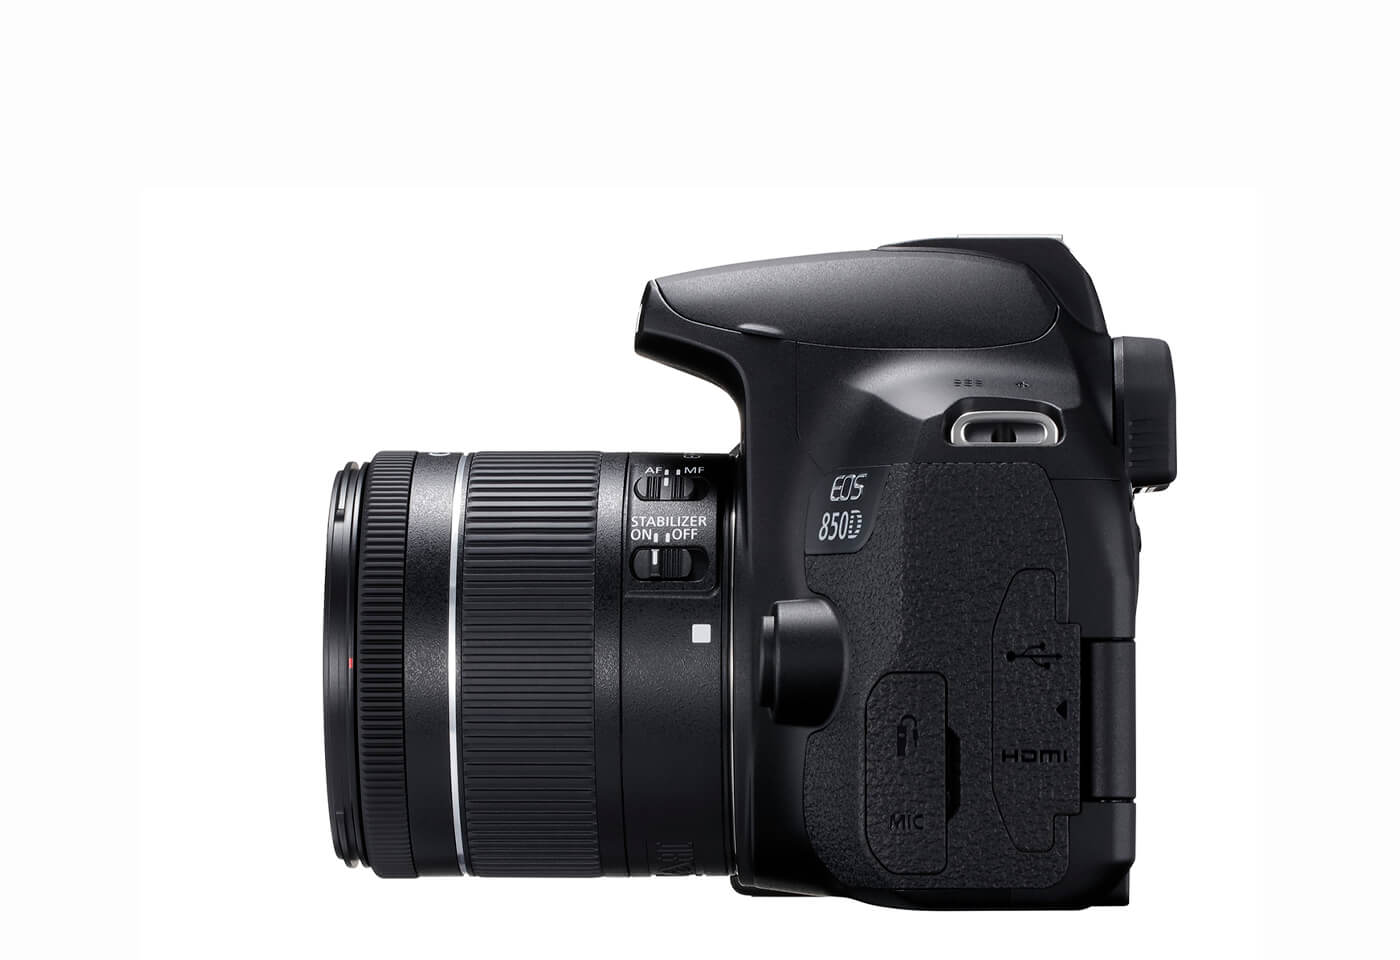 Side profile image of EOS 850D